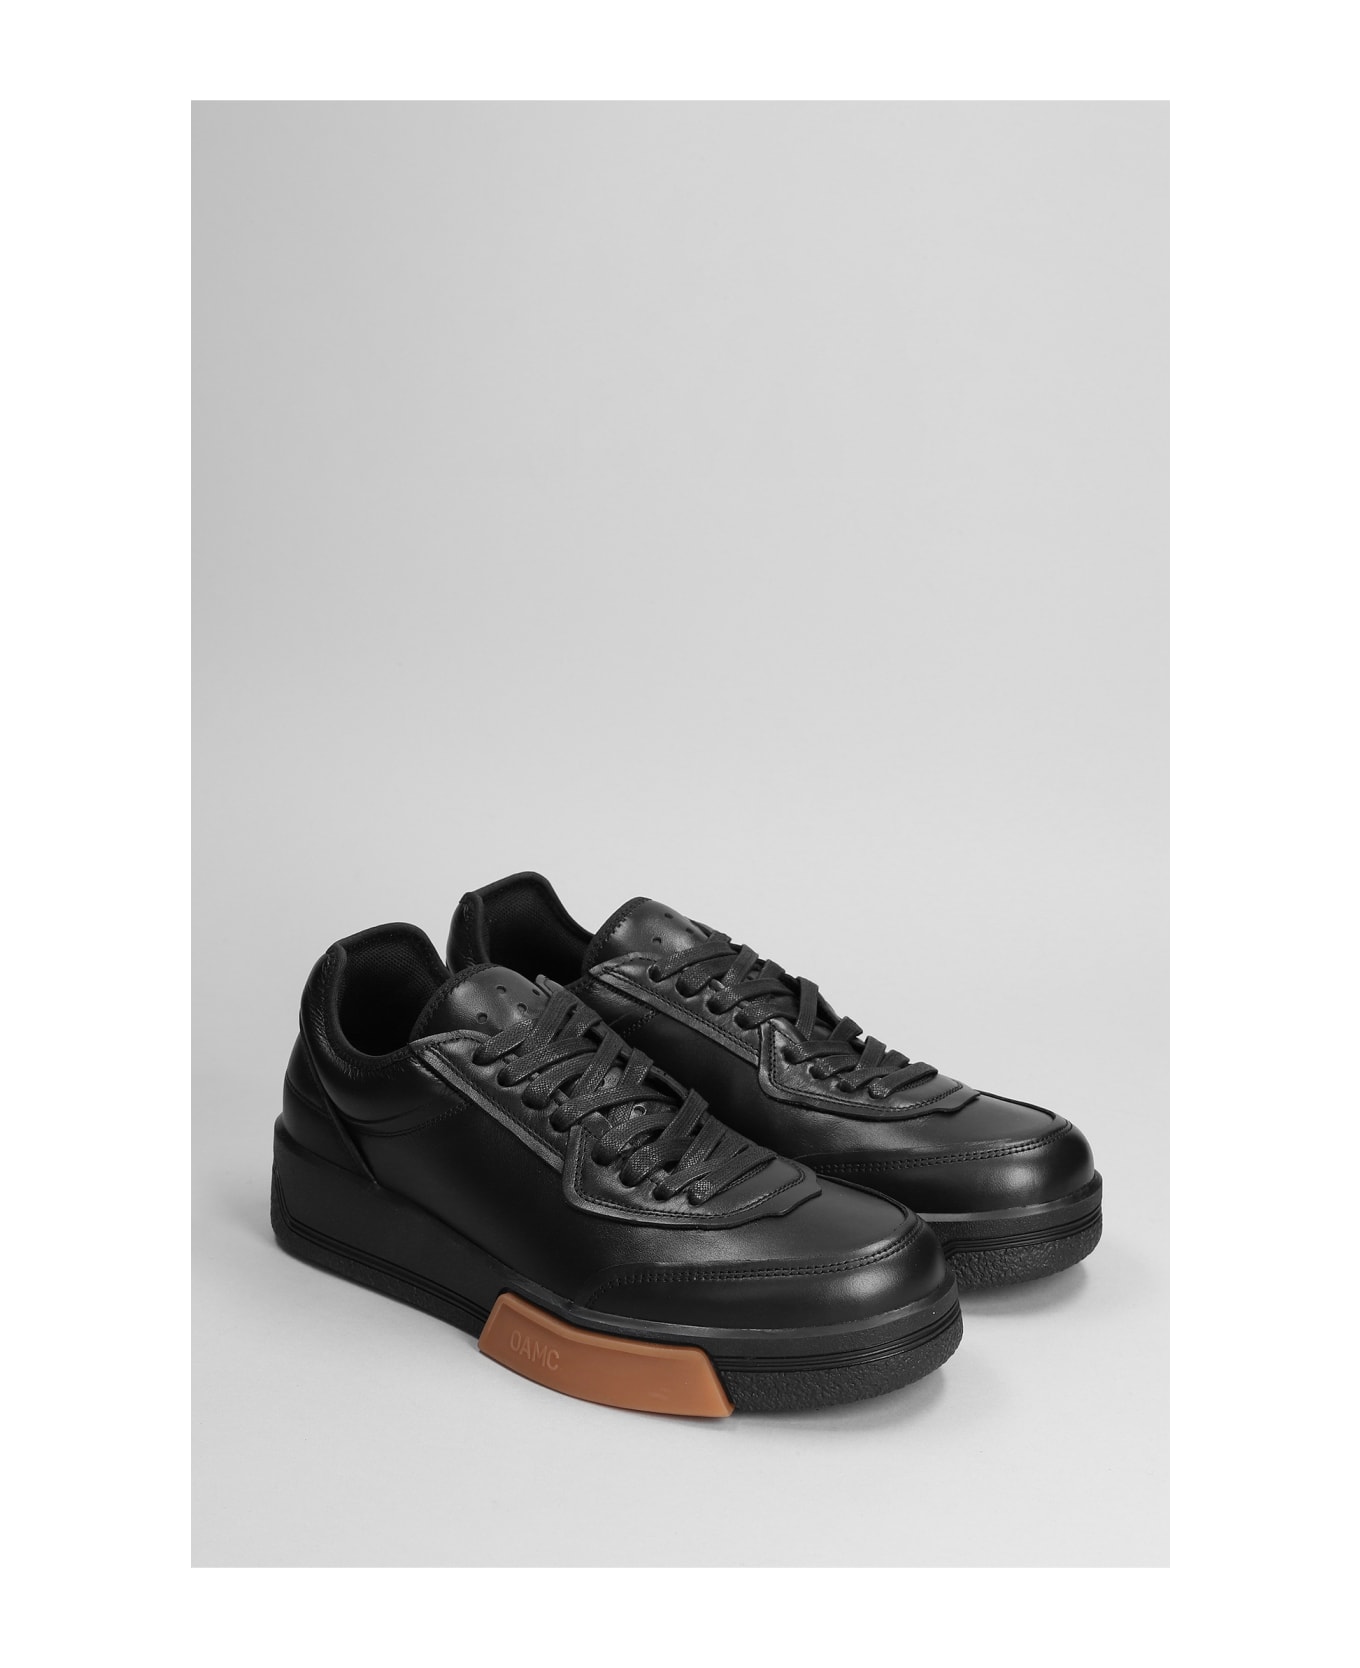 OAMC Cosmos Sneakers In Black Leather